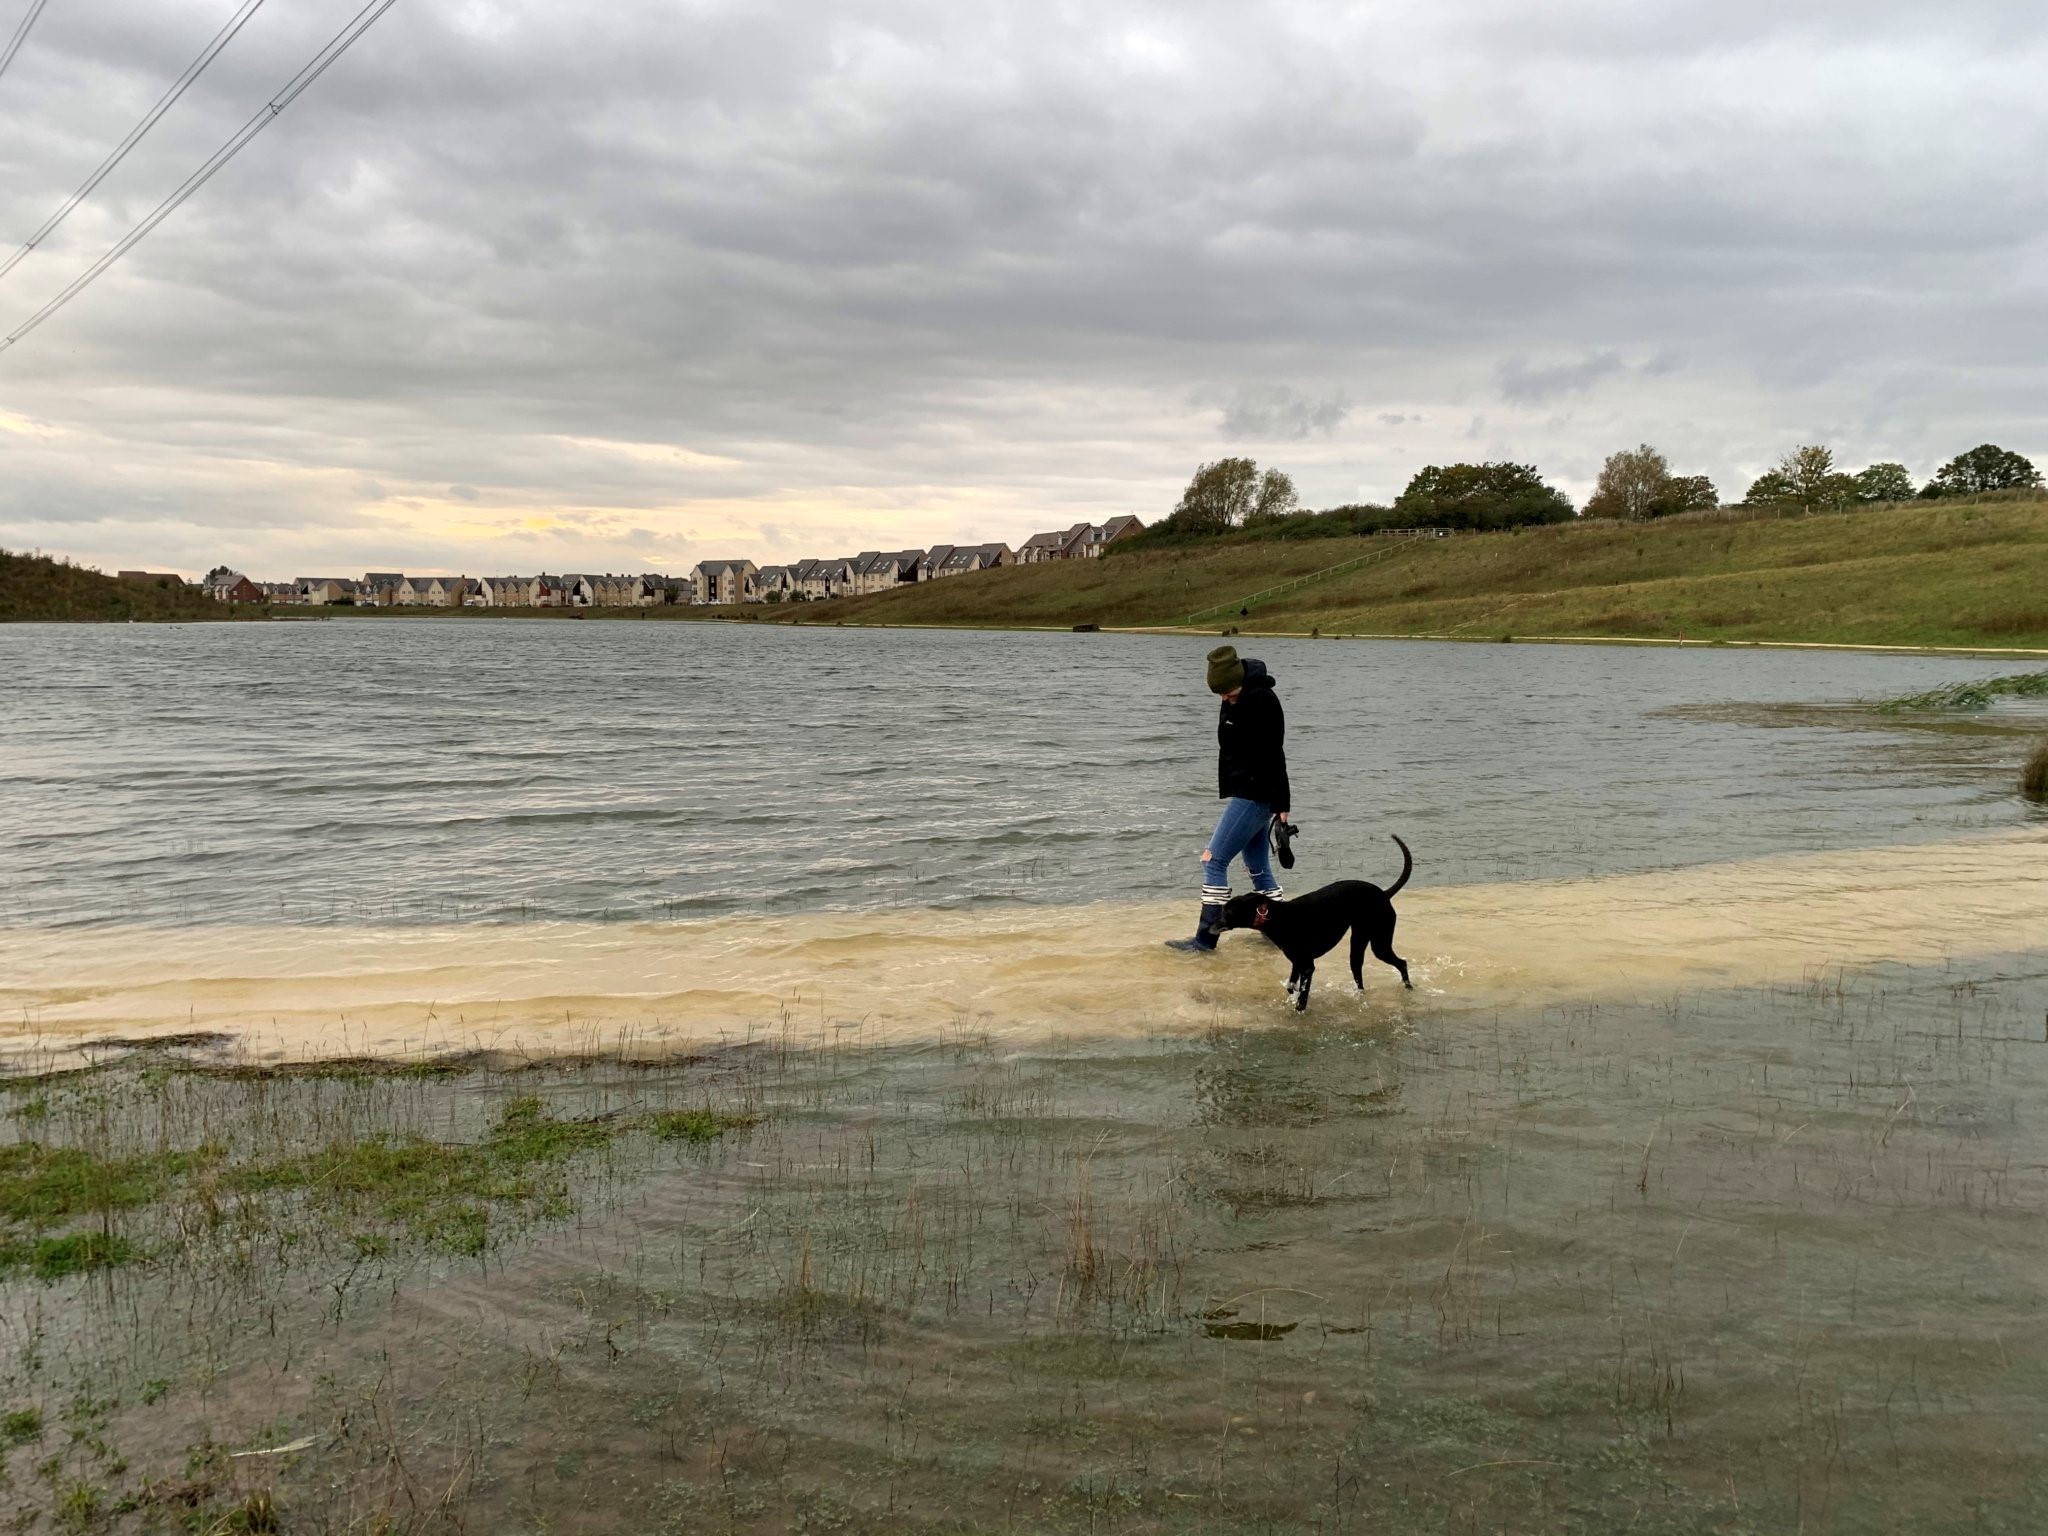 a person walking a dog on a beach next to a body of water.